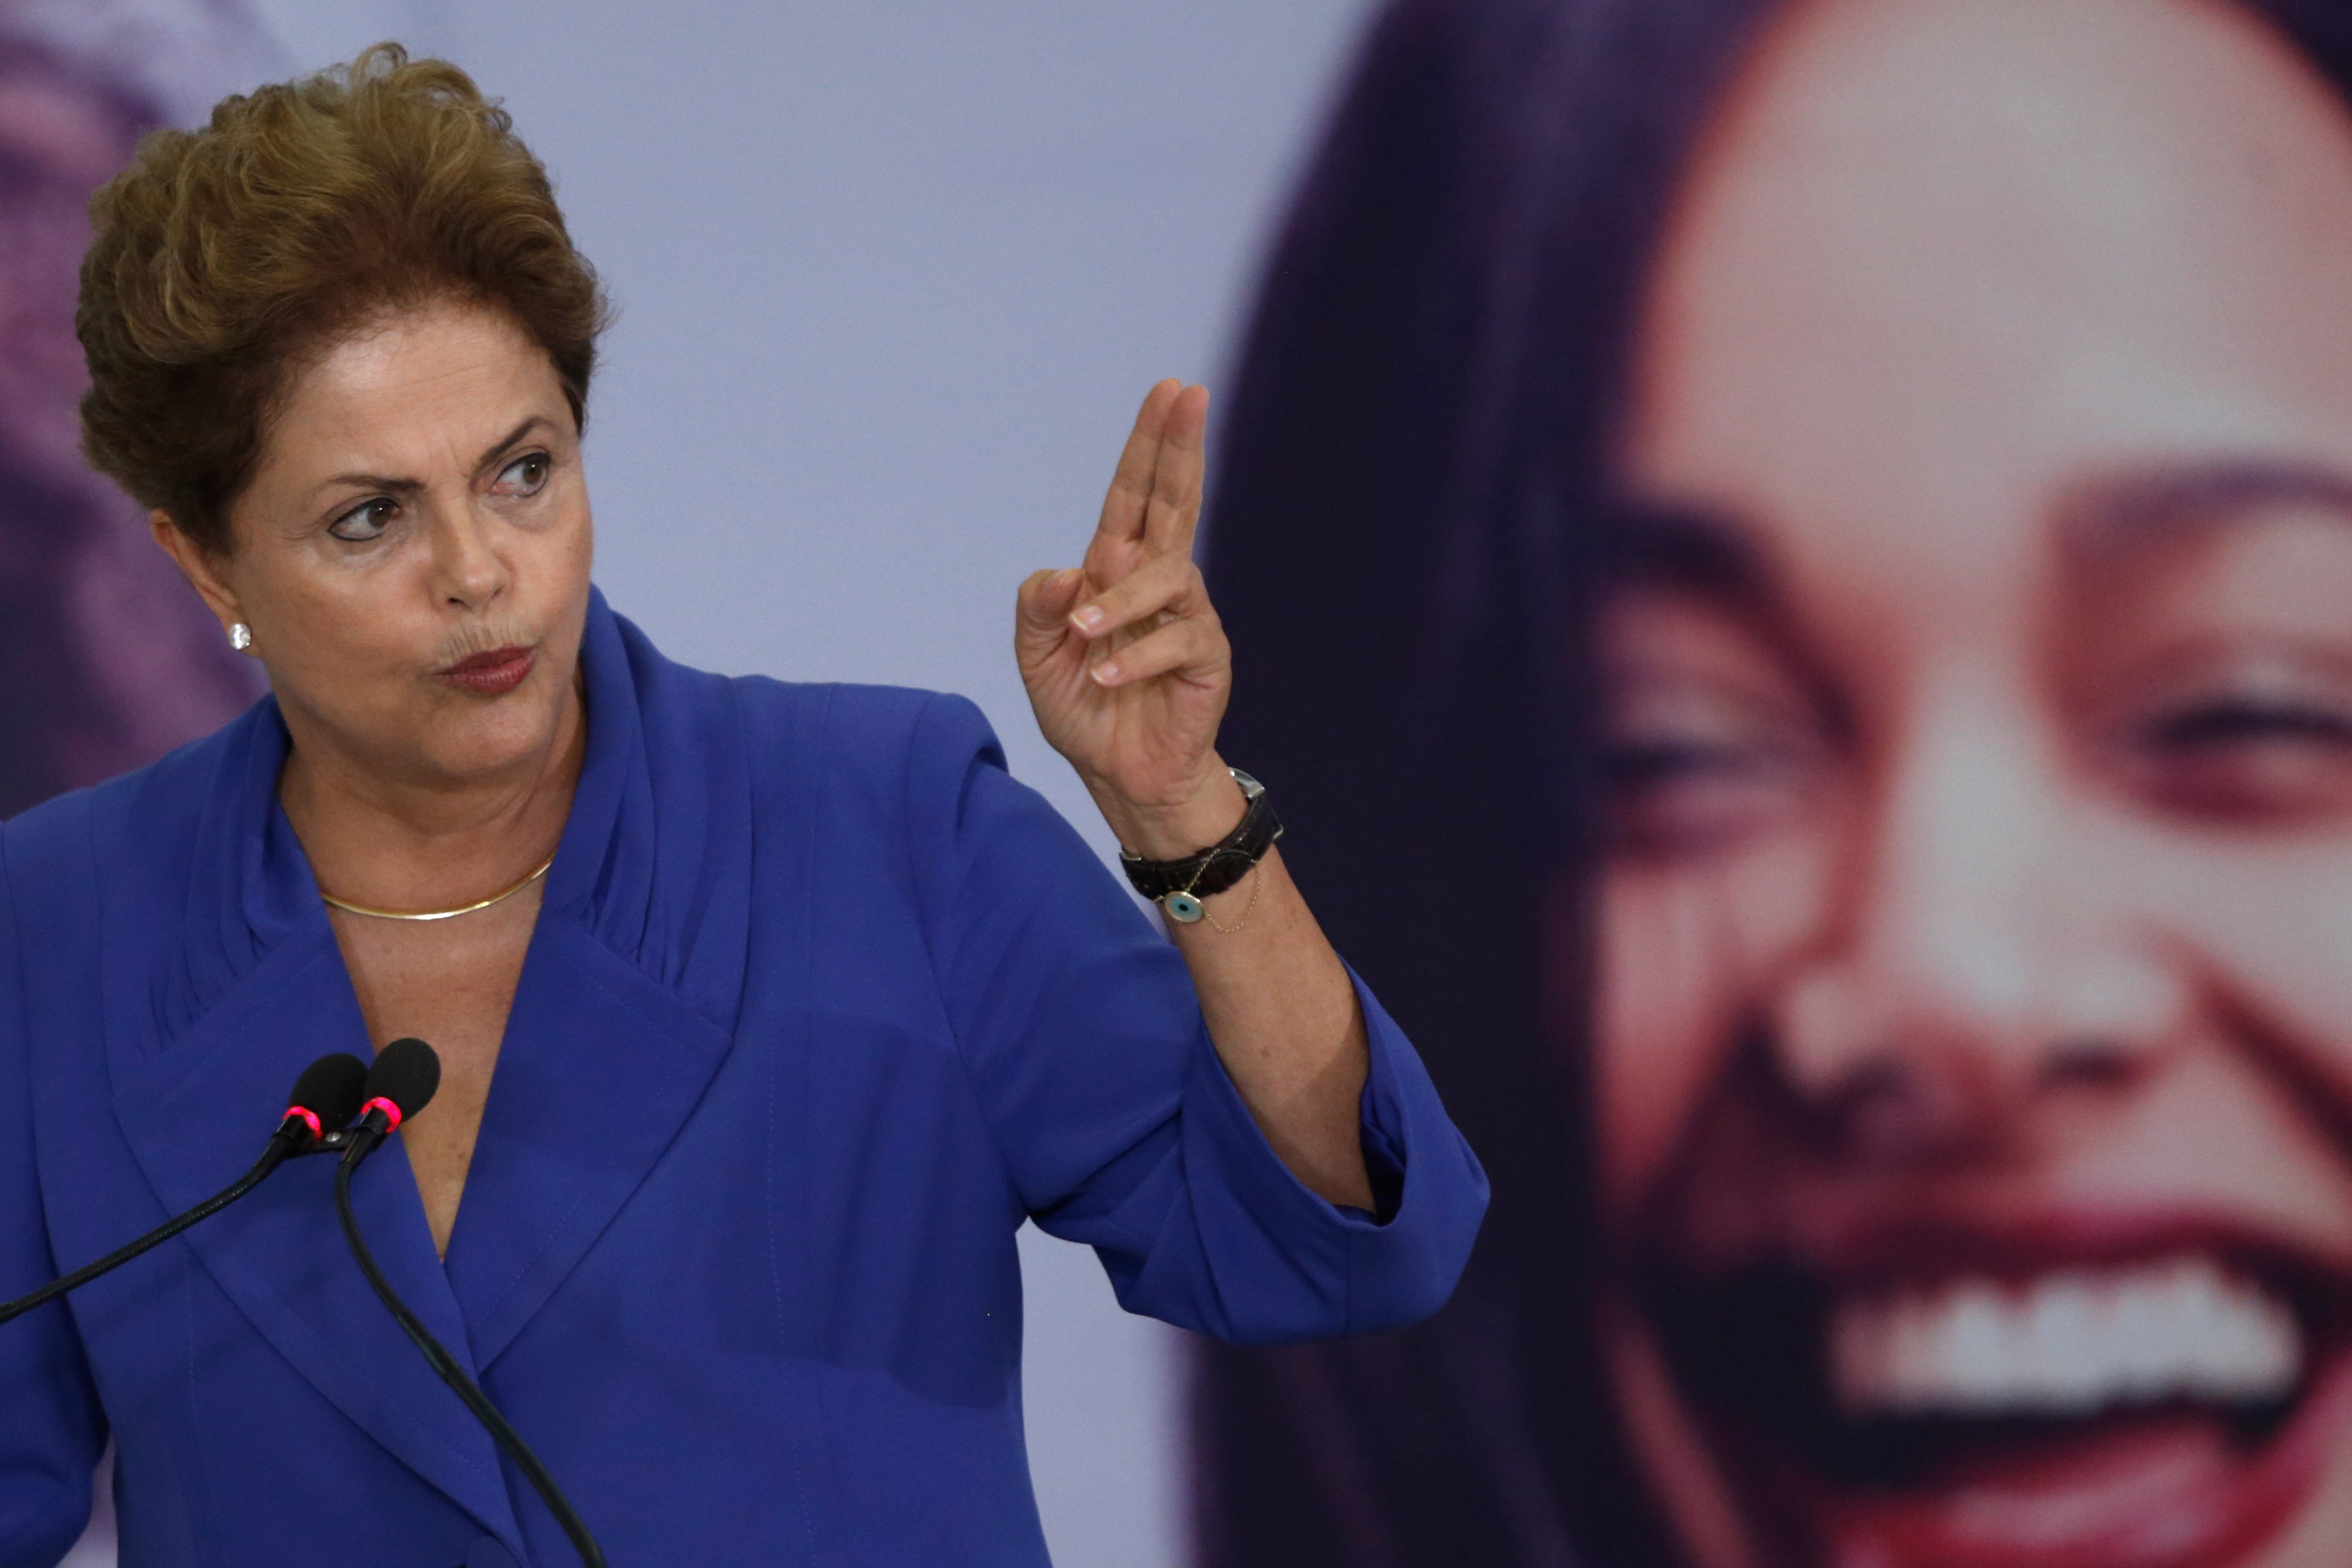 Brazil's President Dilma Rousseff speaks during a signing ceremony for a harsher law against femicide, at the Planalto Presidential Palace in Brasilia, Brazil, March 9, 2015. (Eraldo Peres&mdash;AP)